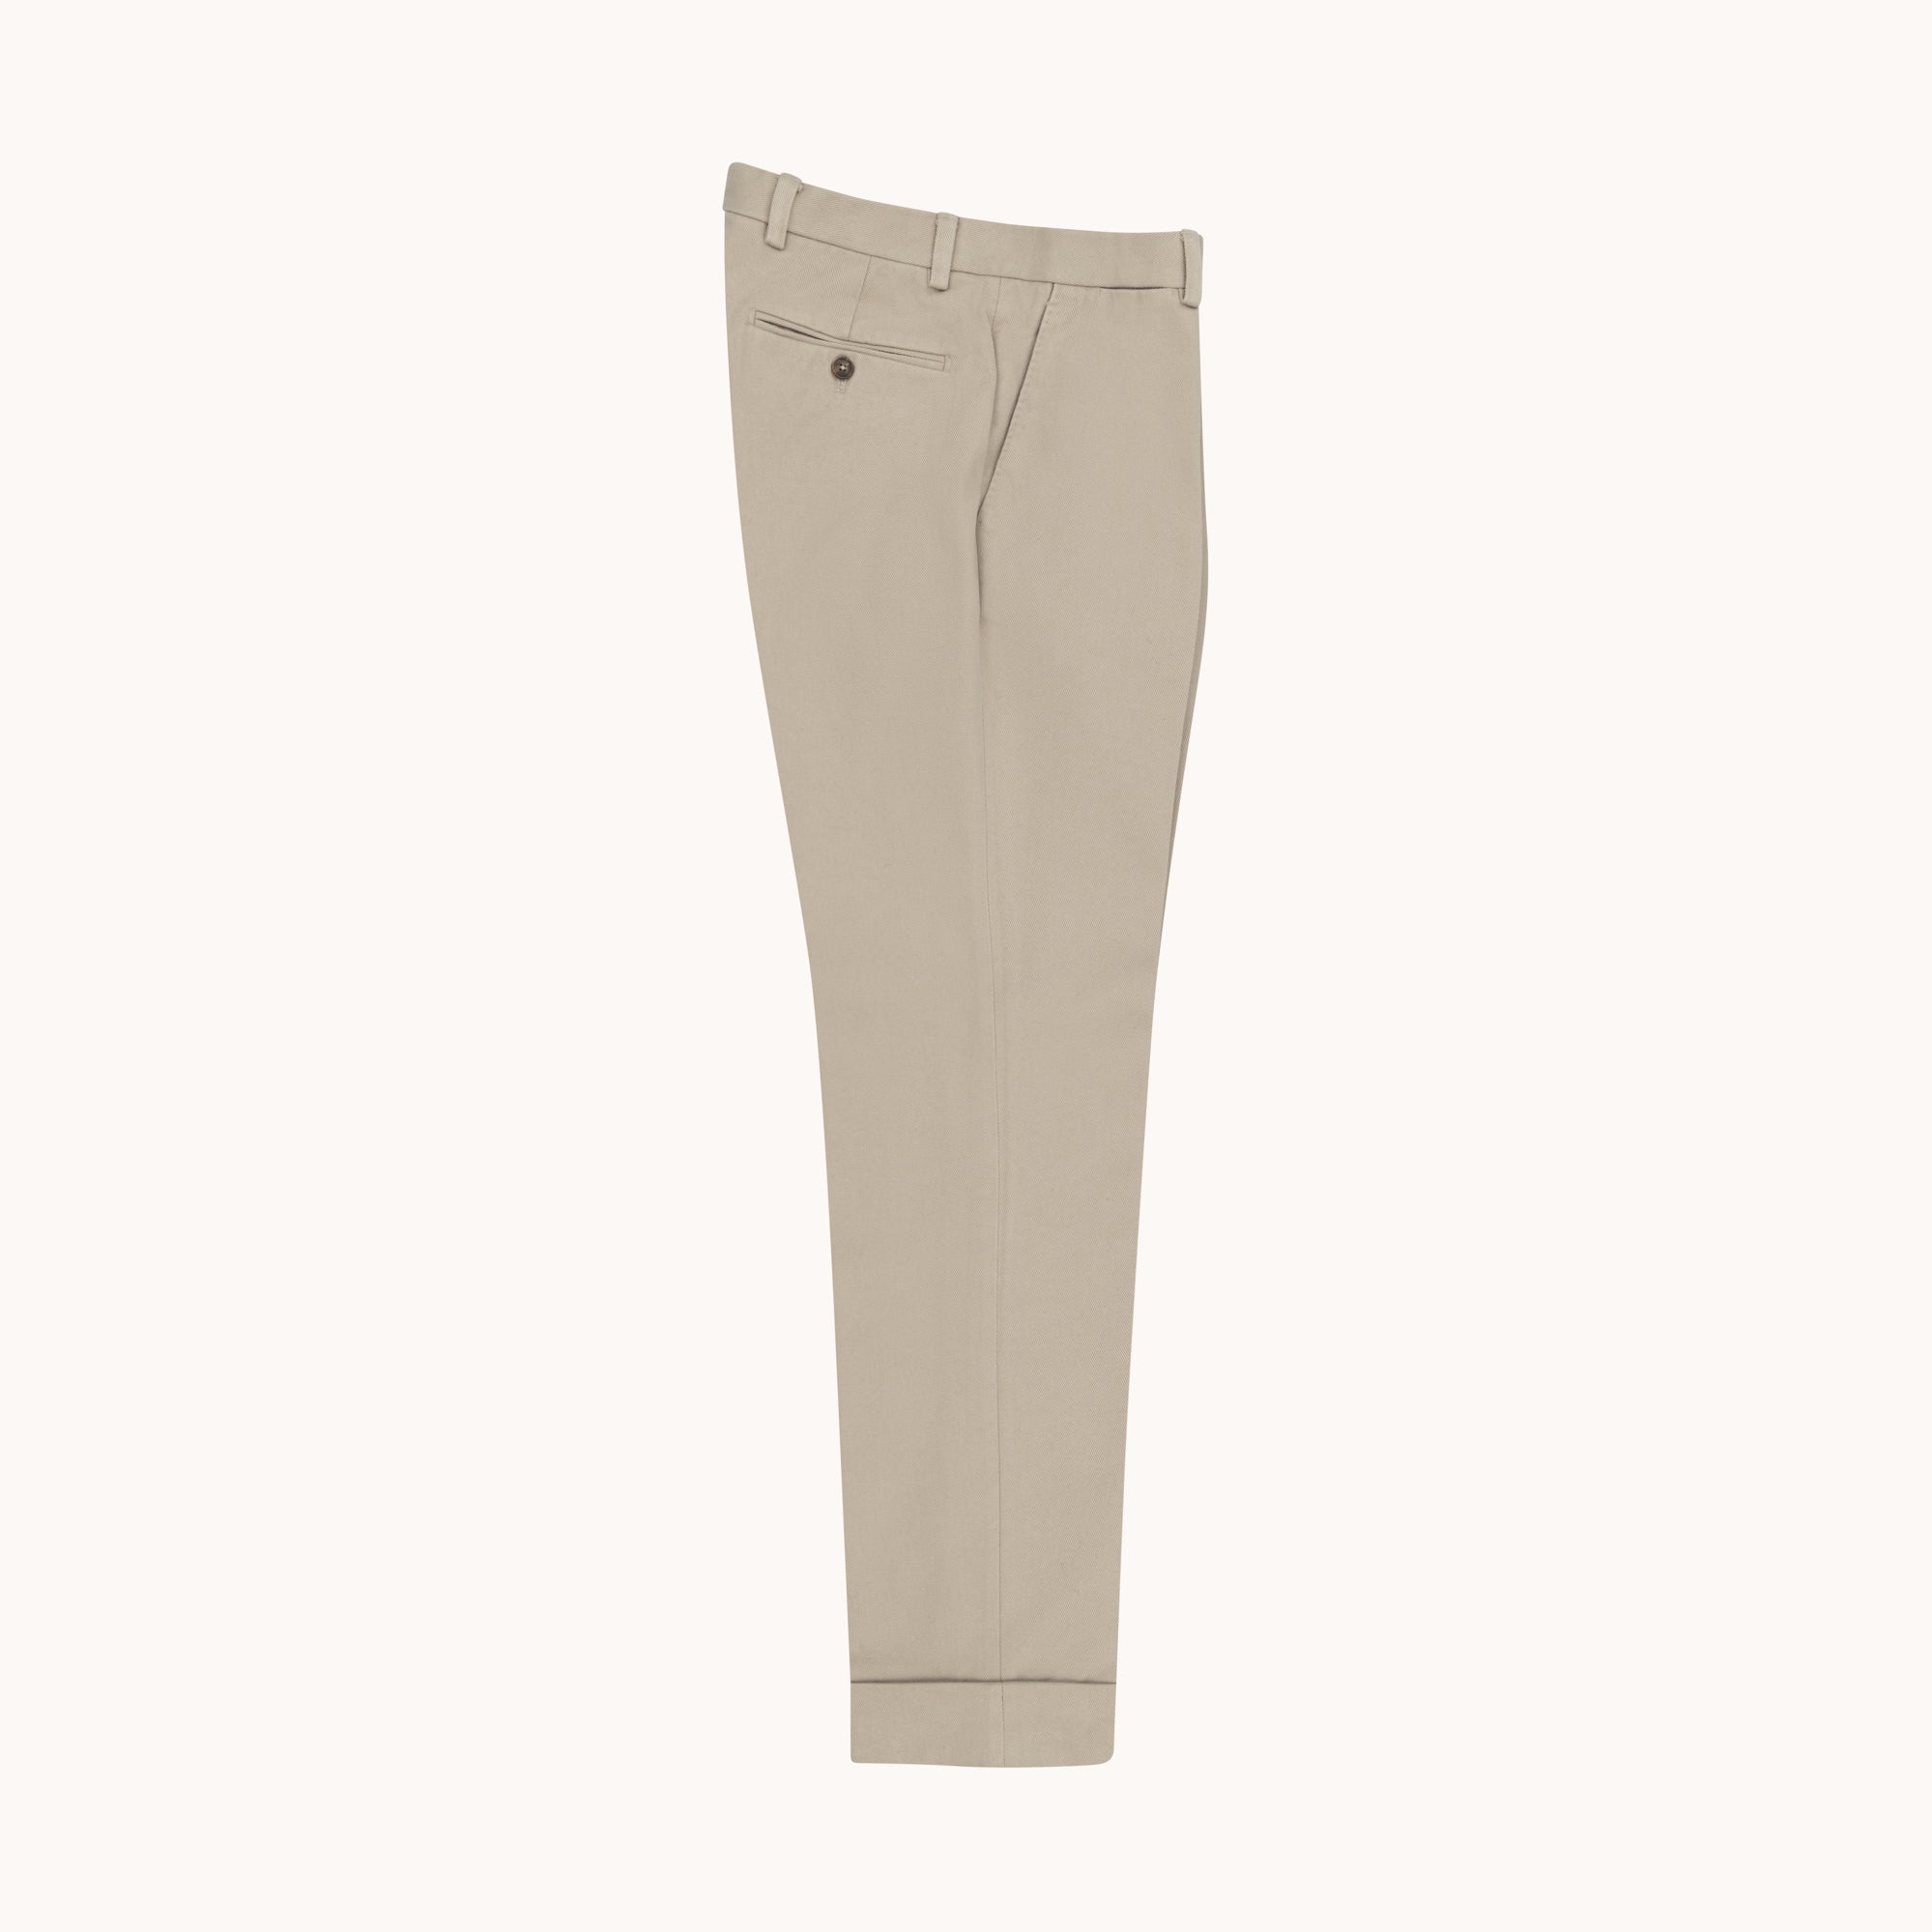 Garment Washed Flat Front Trouser - Stone Cotton Drill